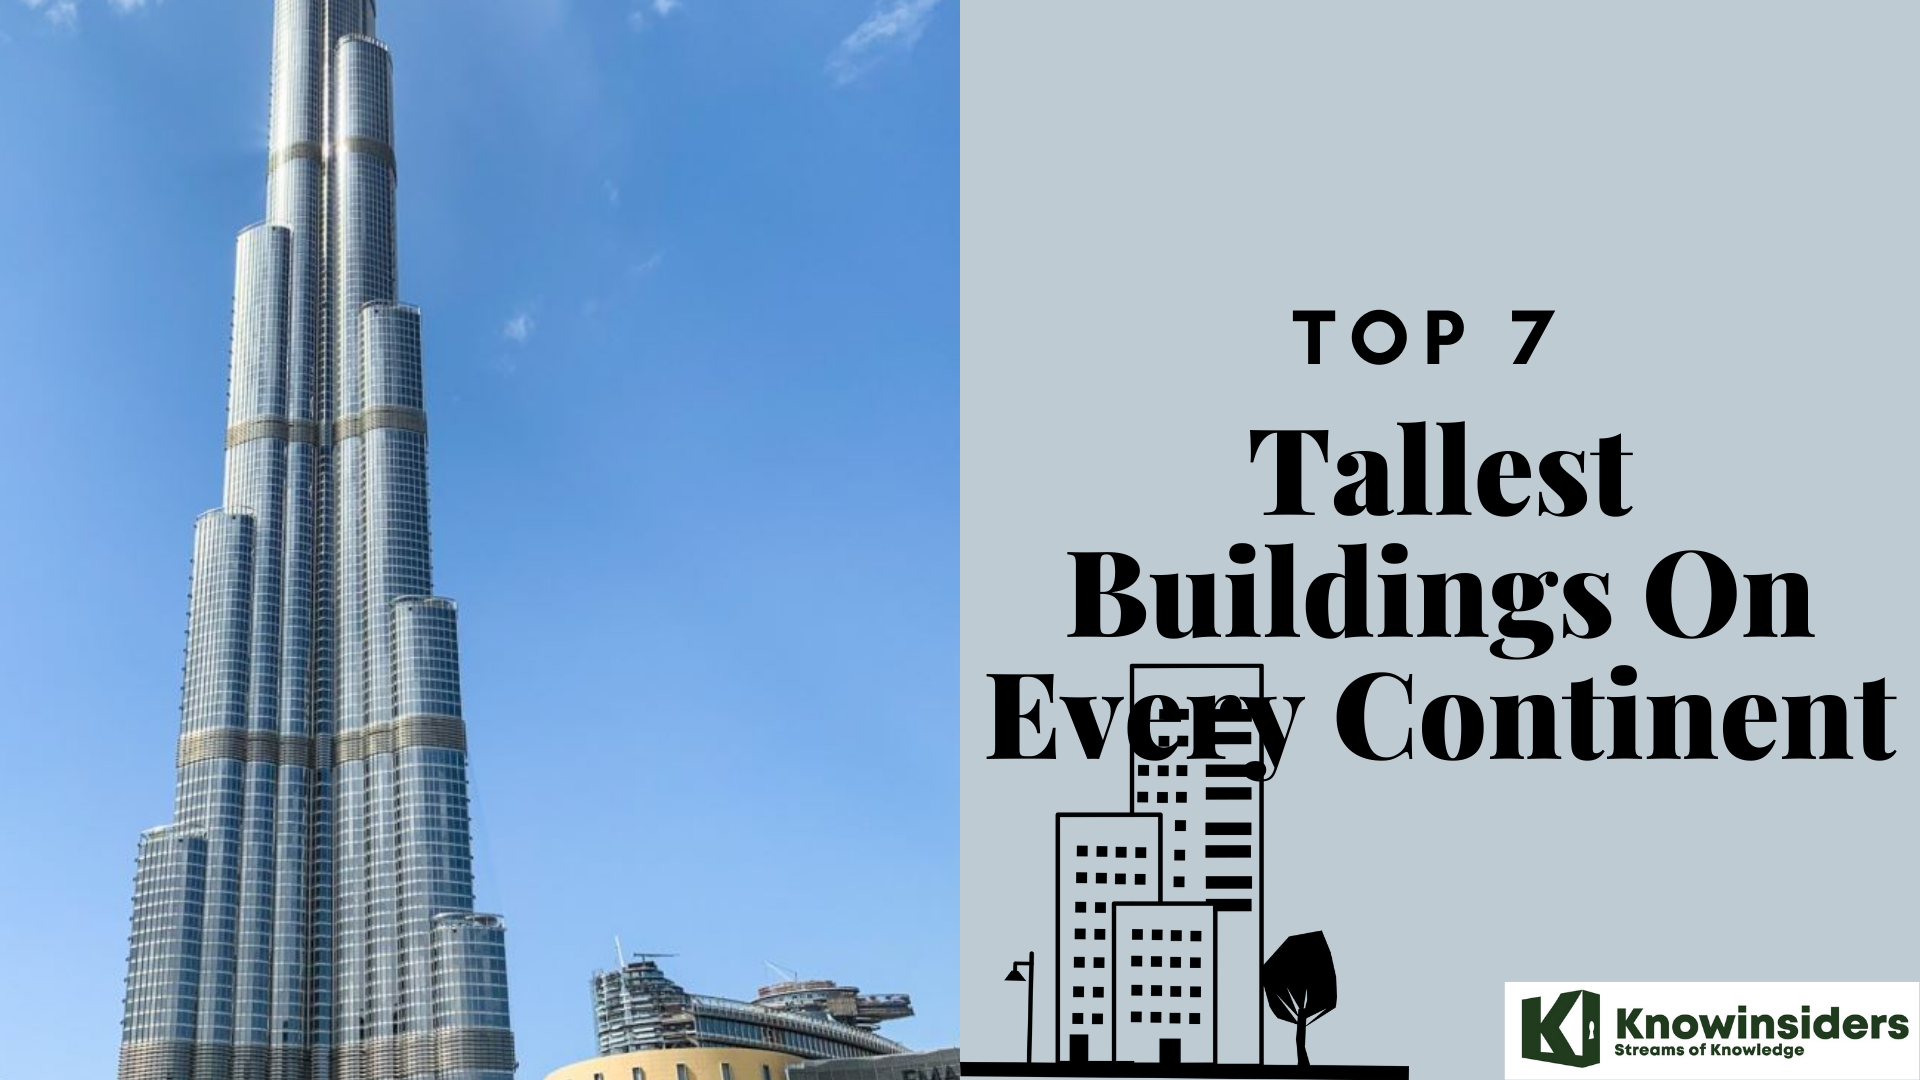 Top 7 Tallest Buildings On Every Continent